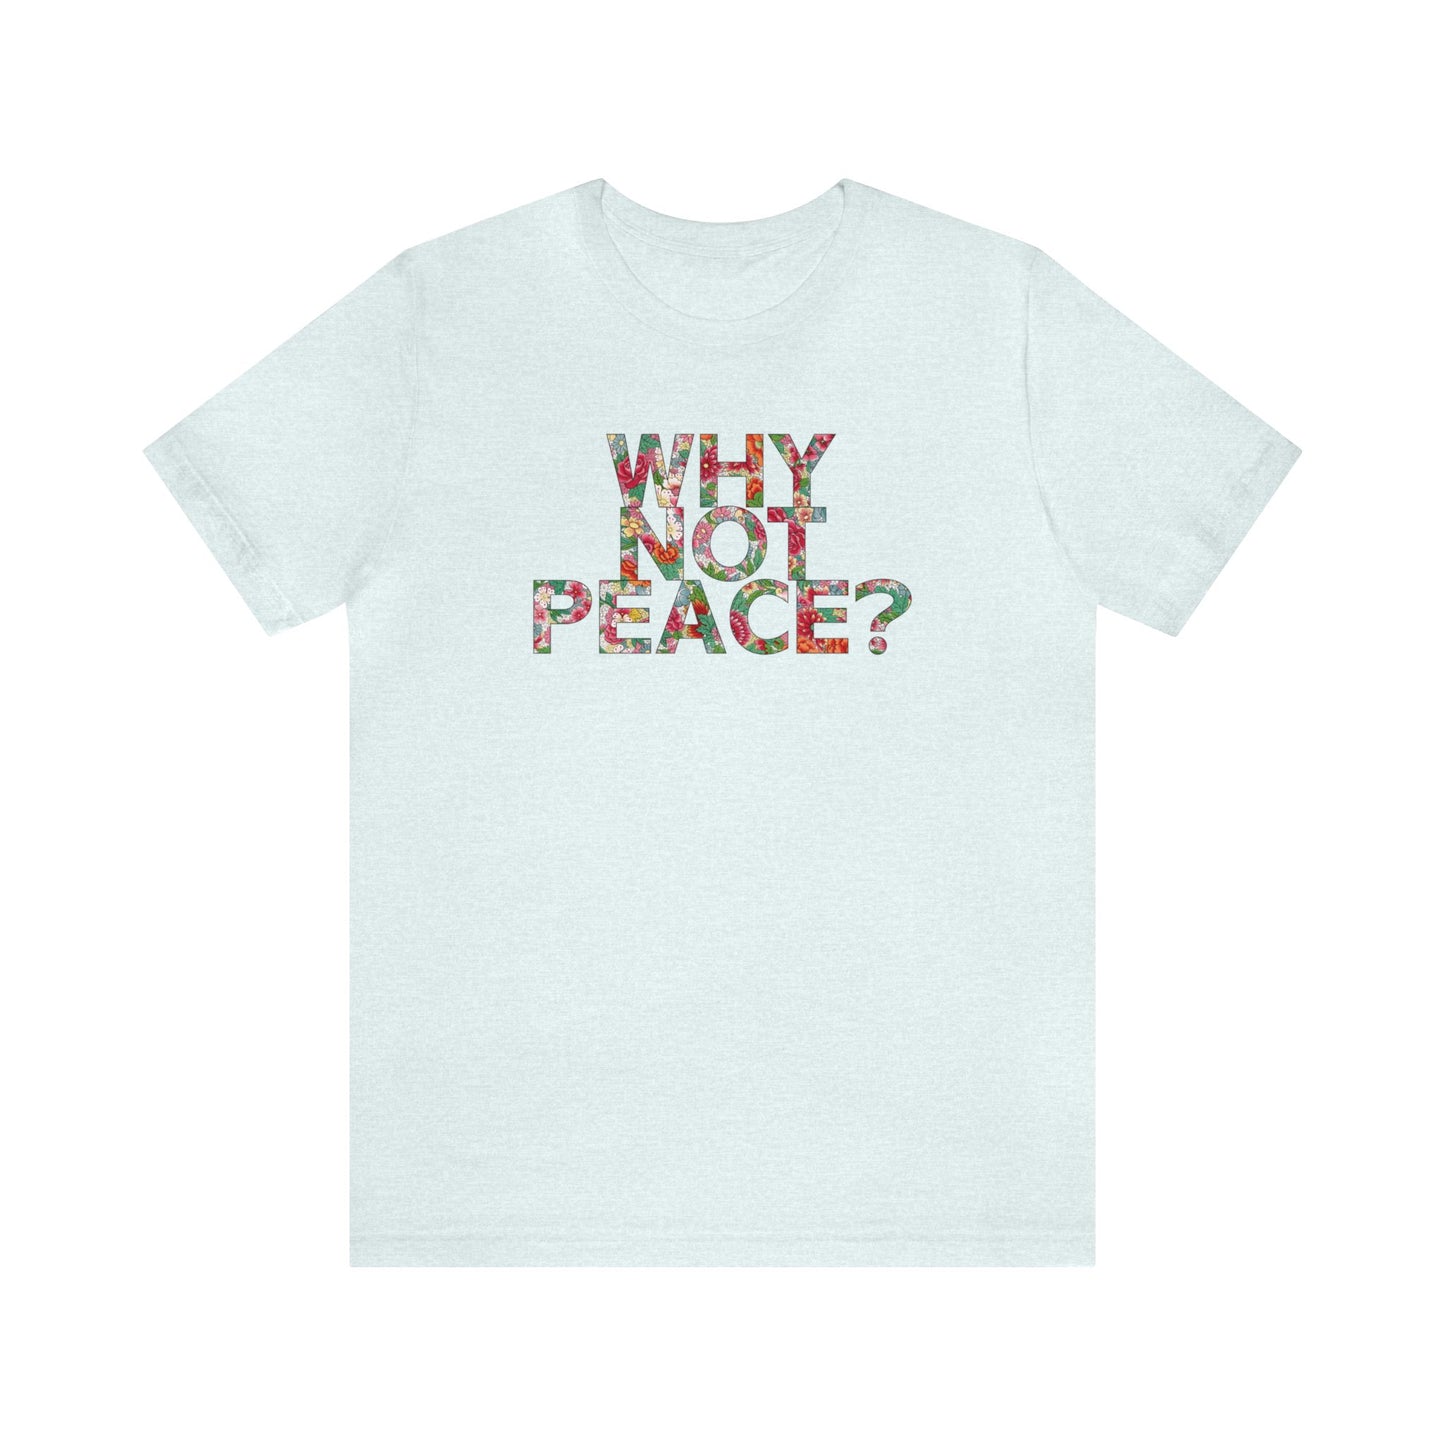 Why Not Peace? - Unisex T-Shirt